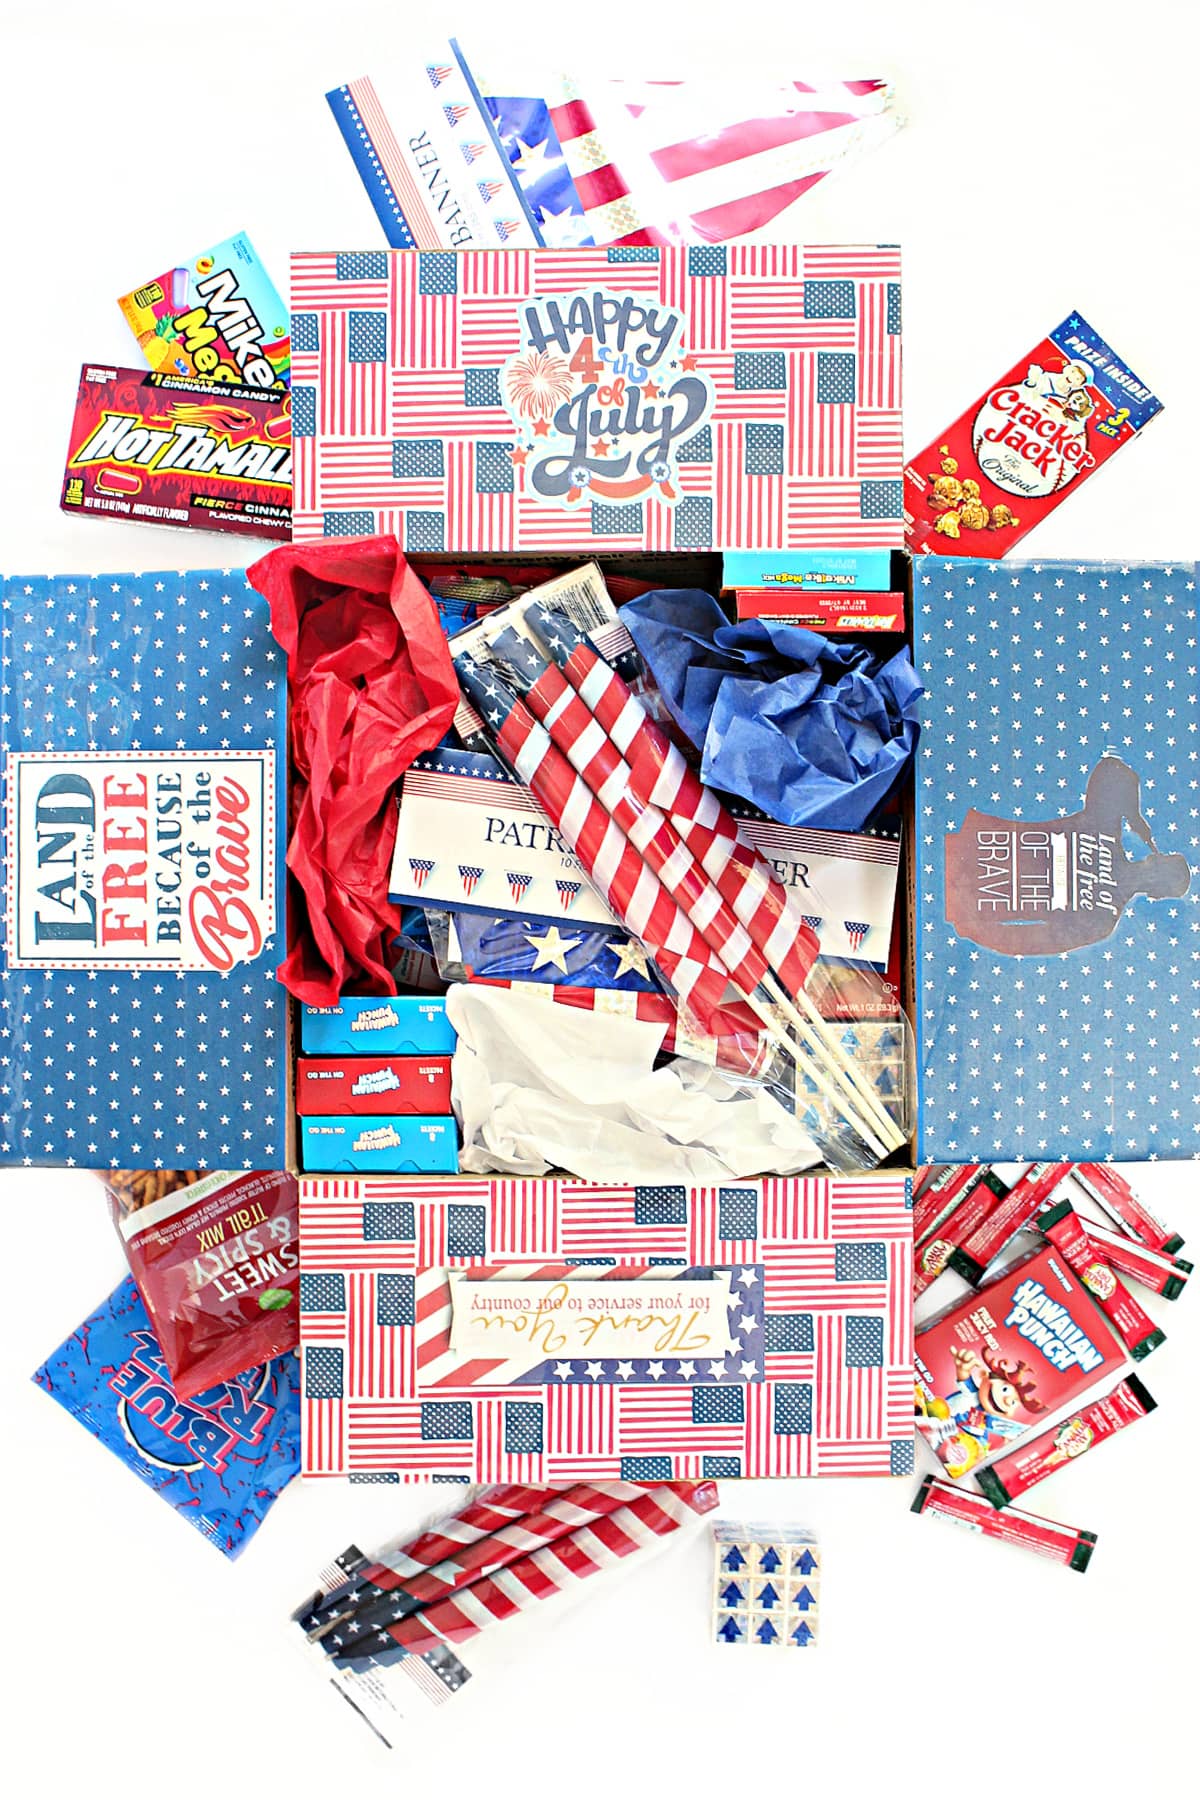 4th of July Care Package decorated and filled with red, white, and blue.